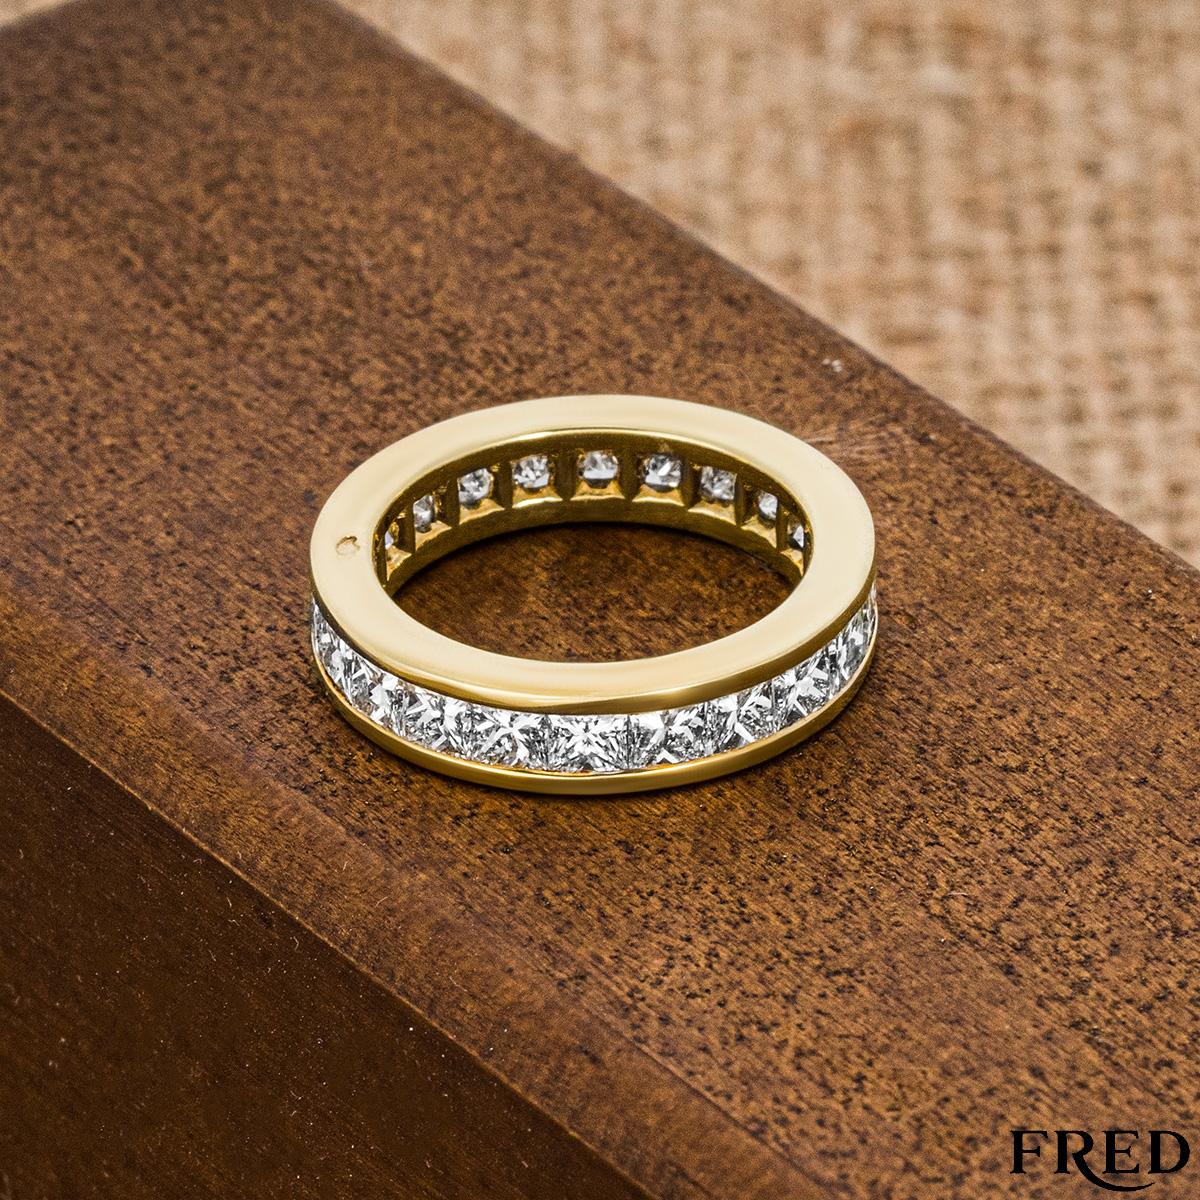 Fred Yellow Gold Diamond Eternity Ring For Sale 2